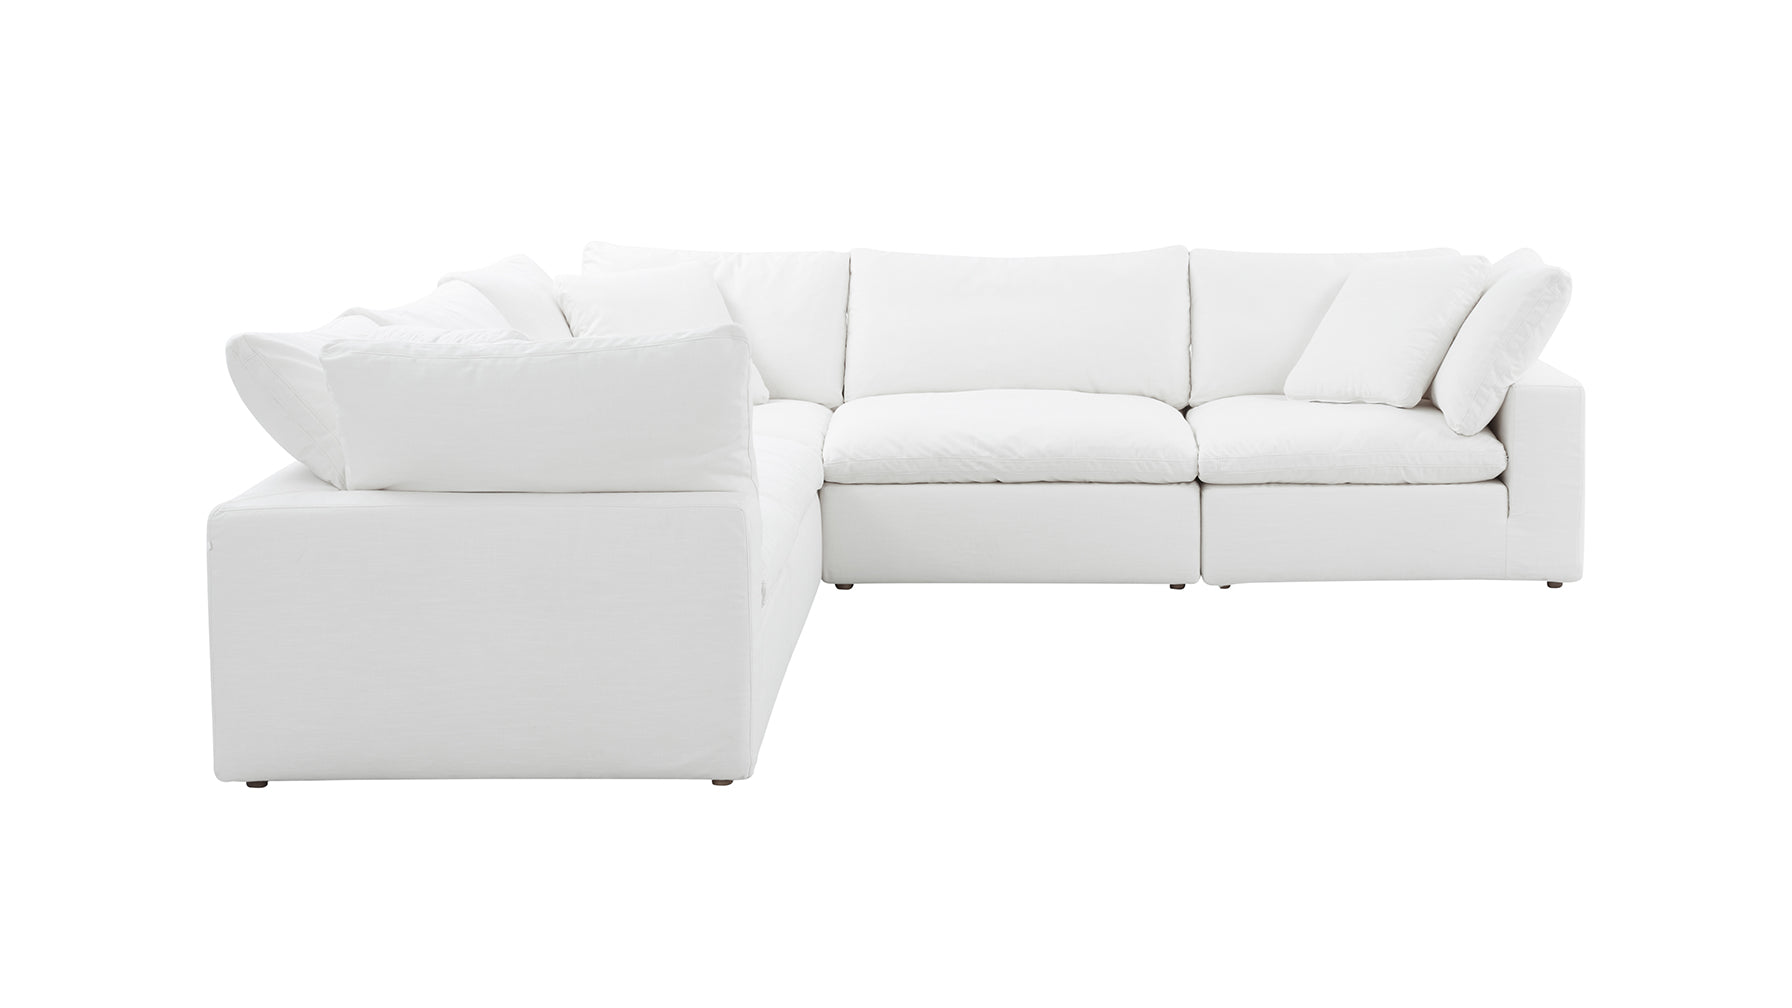 Movie Night™ 5-Piece Modular Sectional Closed, Large, Brie - Image 7